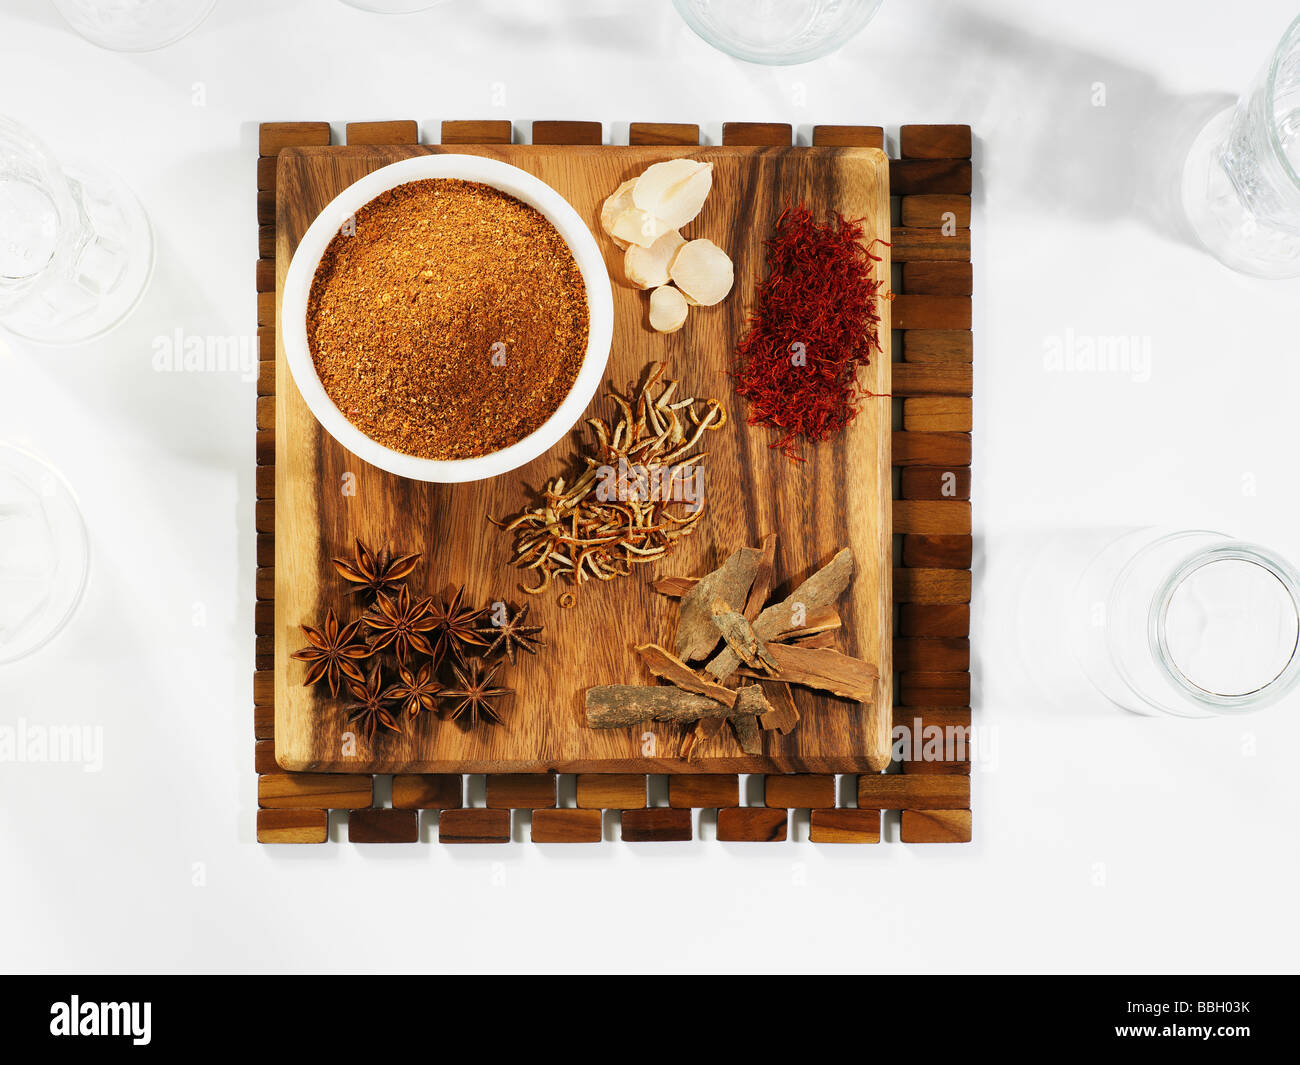 A selection of spices laid out on a wooden board on a wooden table setting Stock Photo